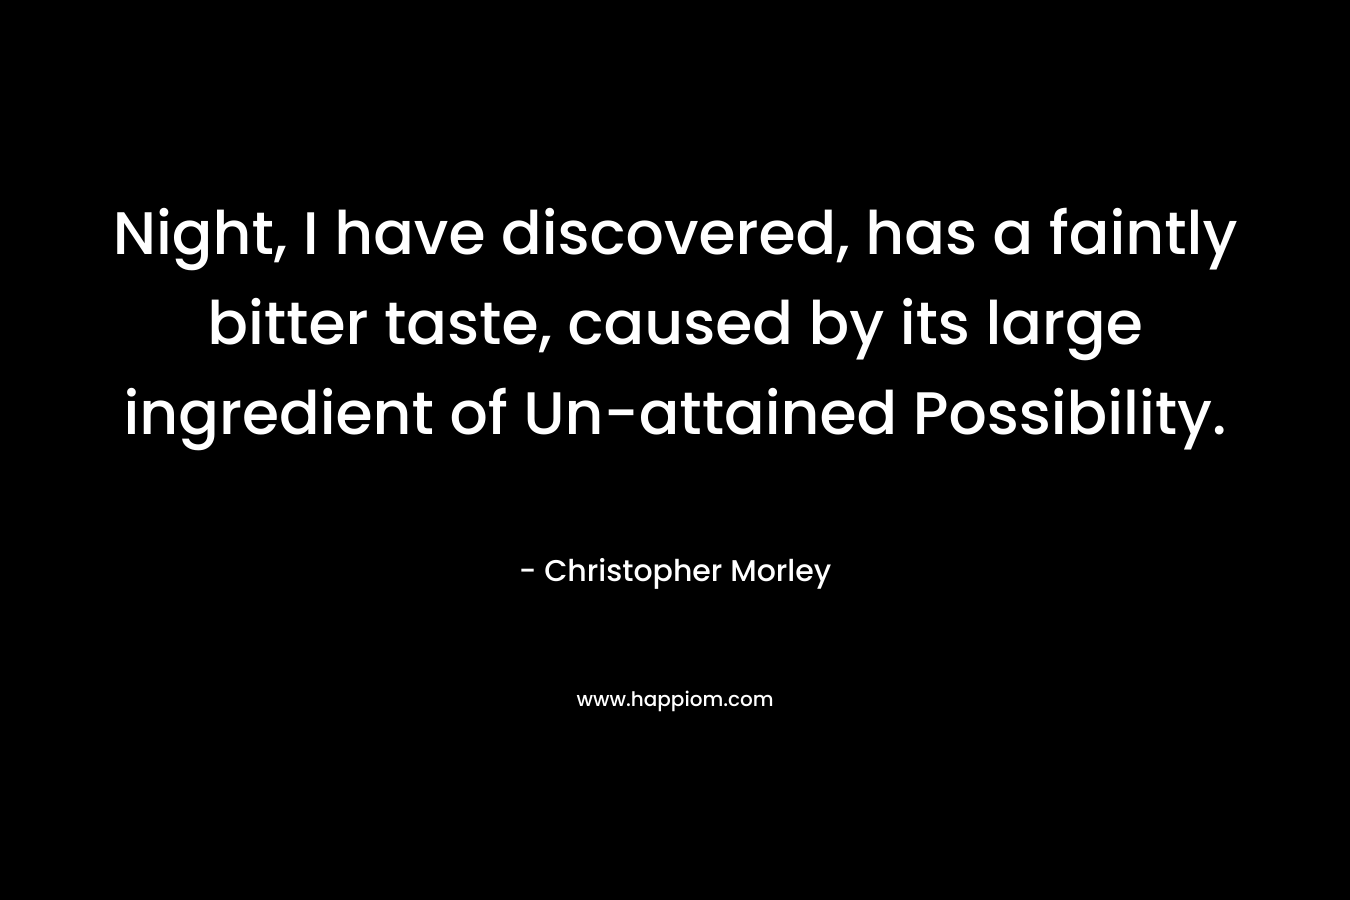 Night, I have discovered, has a faintly bitter taste, caused by its large ingredient of Un-attained Possibility. – Christopher Morley